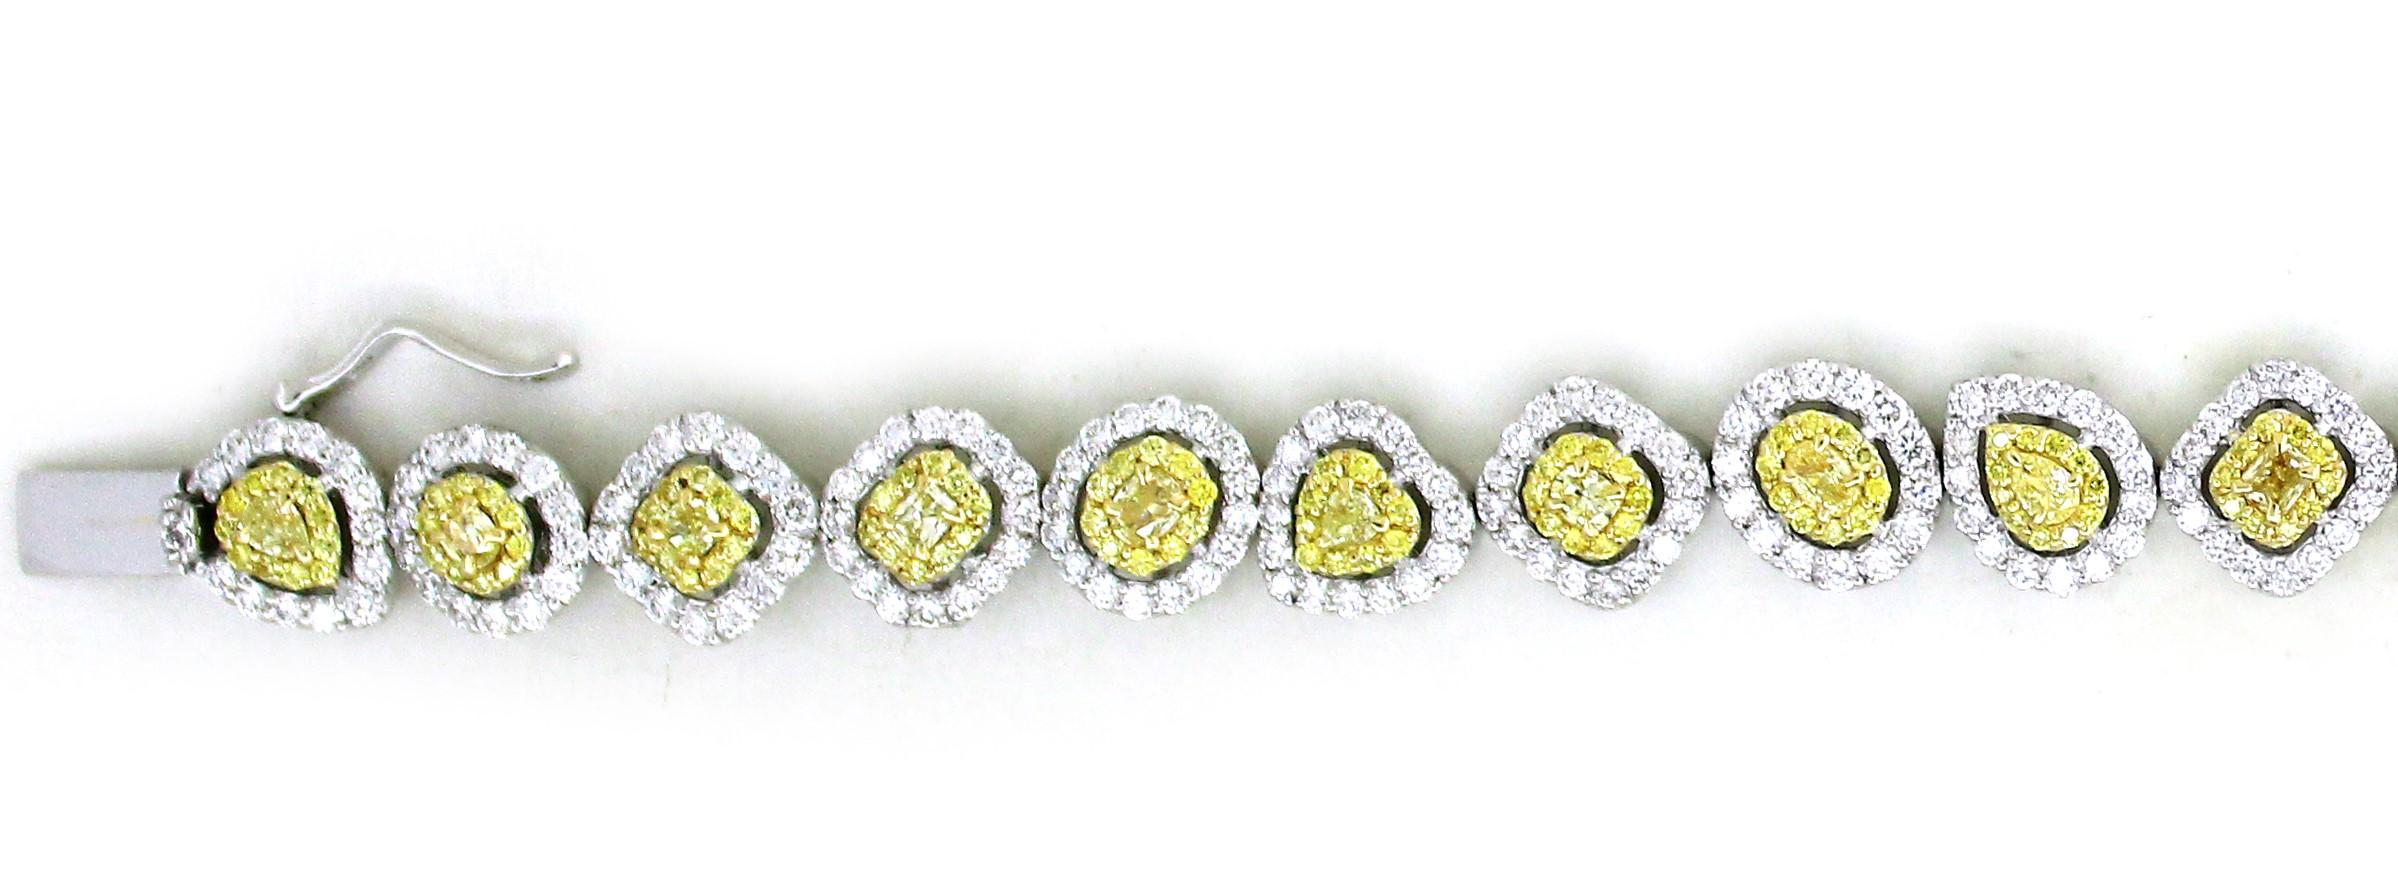 Prepared to be captivated by the sheer magnificence of a modern bracelet that exemplifies opulence, sophistication, and a harmonious blend of precious metals and gemstones.
A splendid ensemble of 20 fancy-shaped yellow diamonds takes center stage,